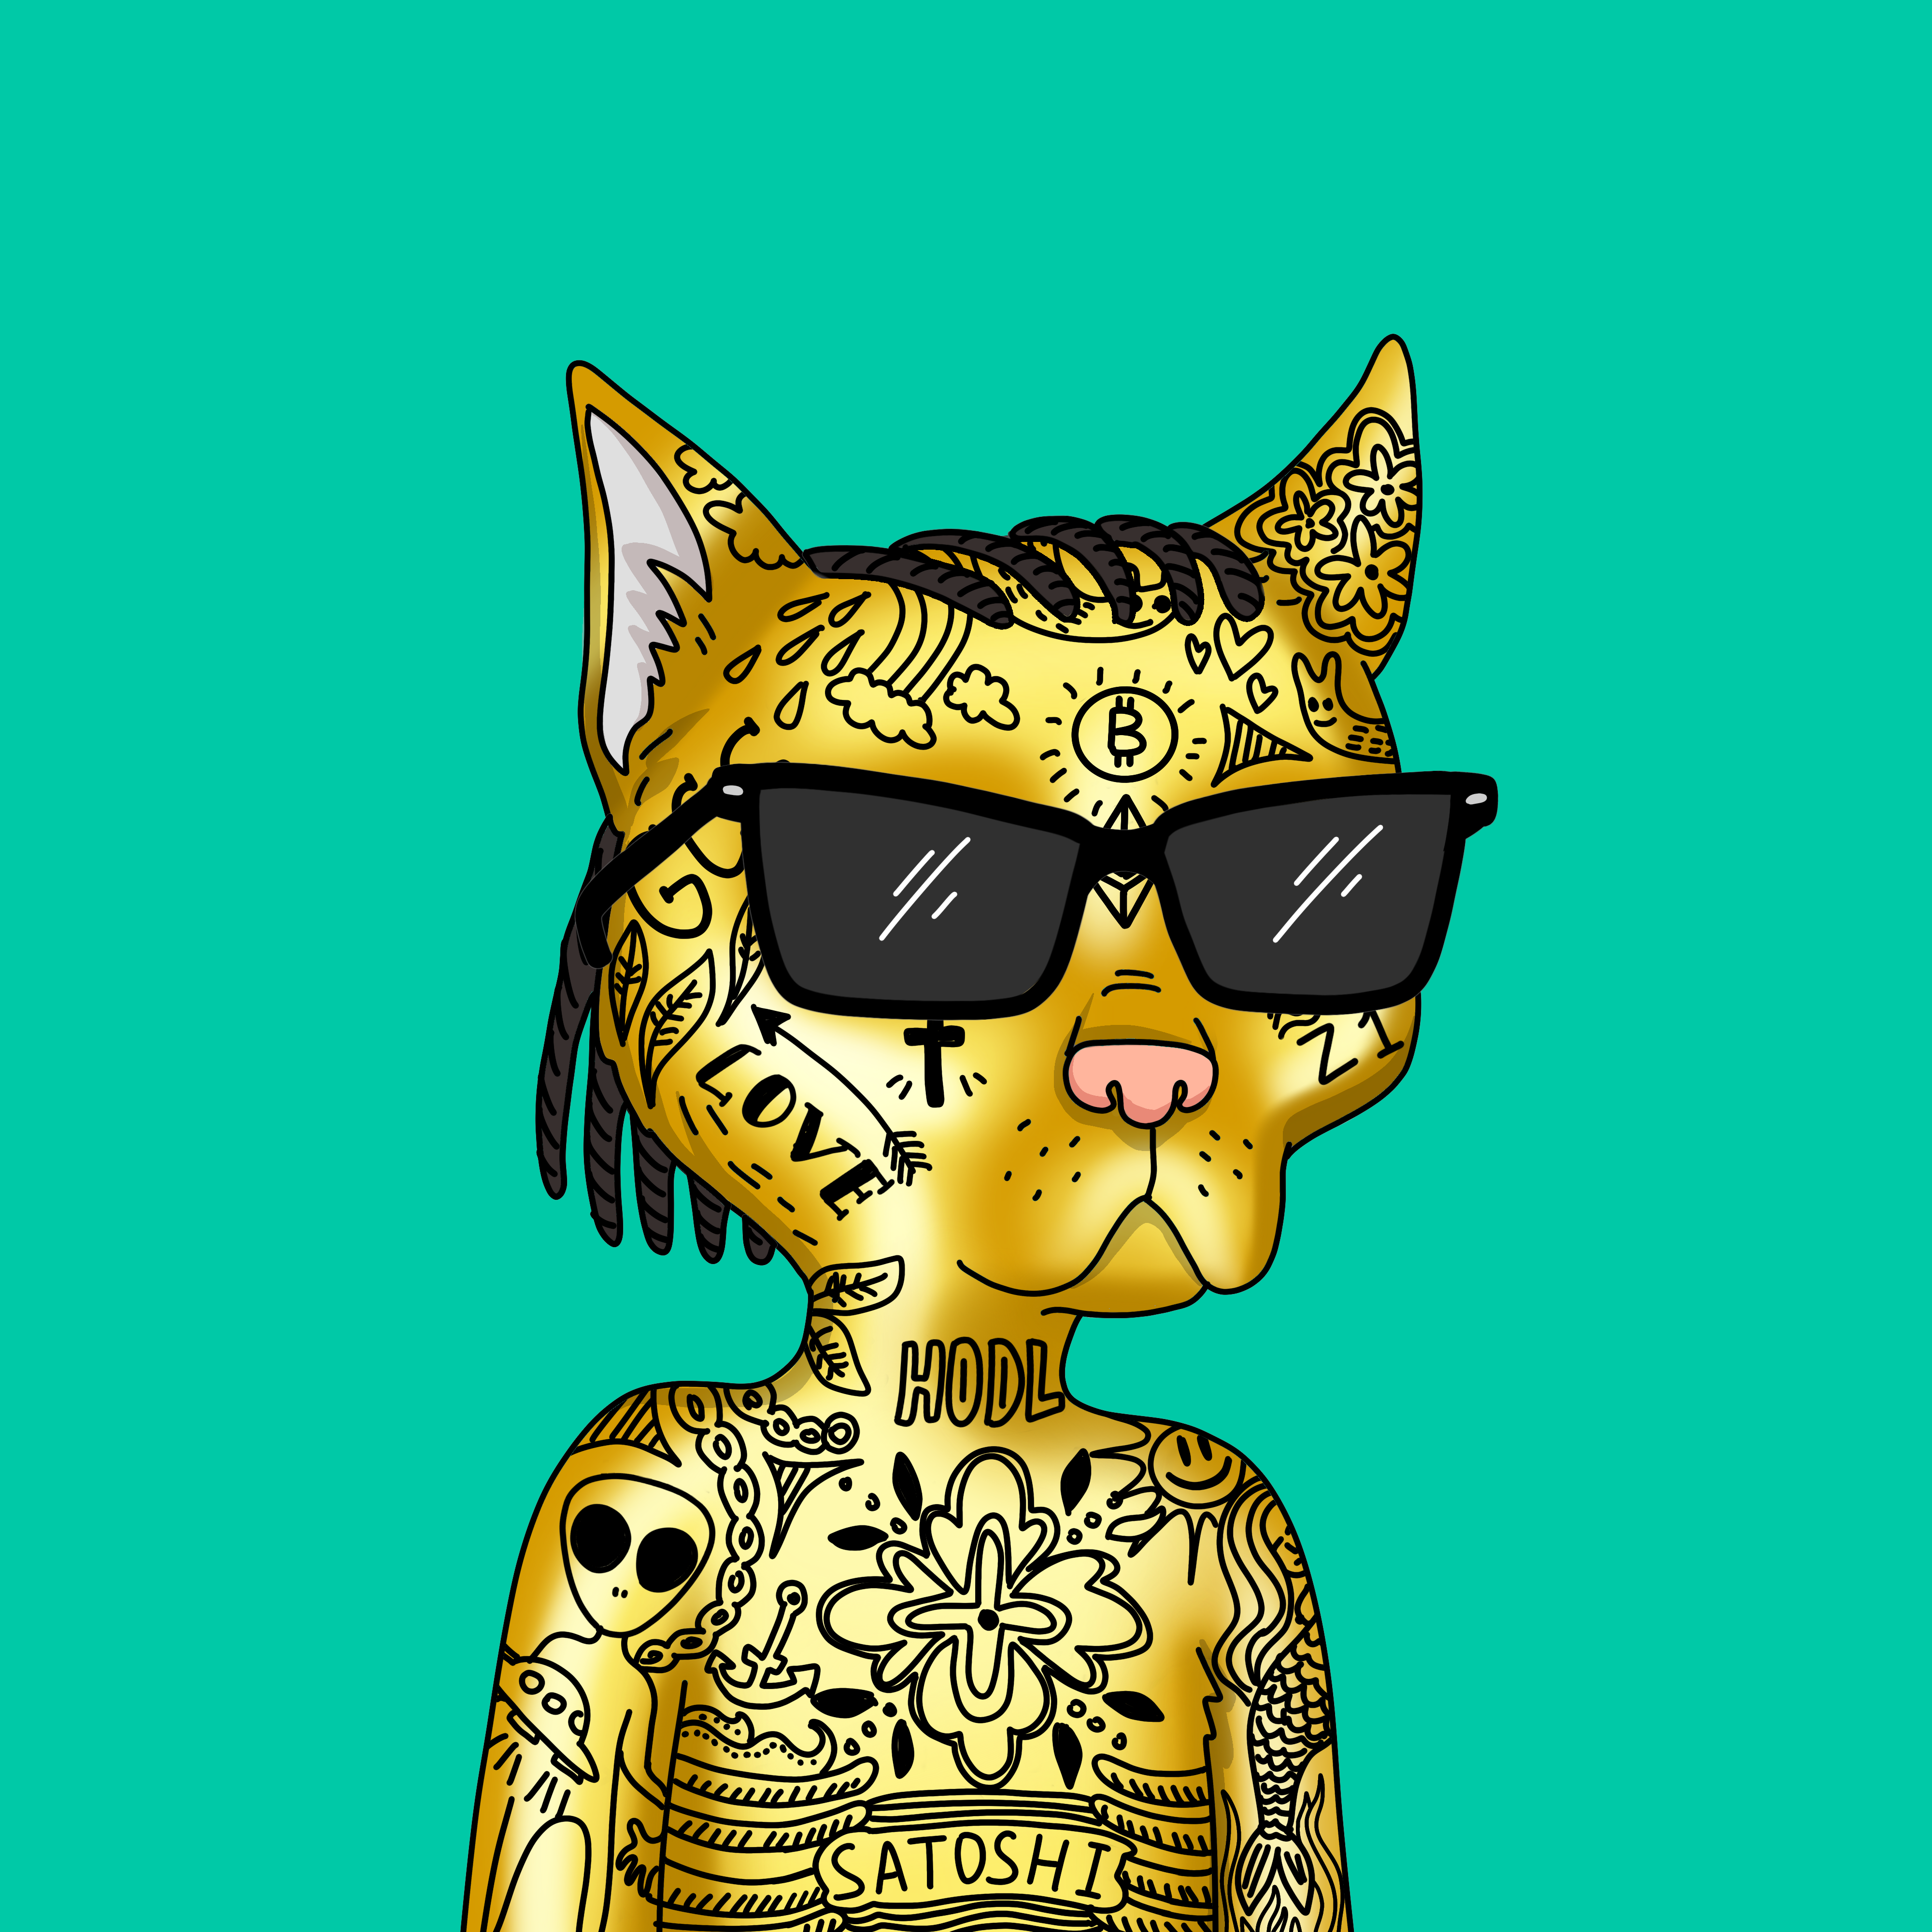 Swag Cats Wallpapers